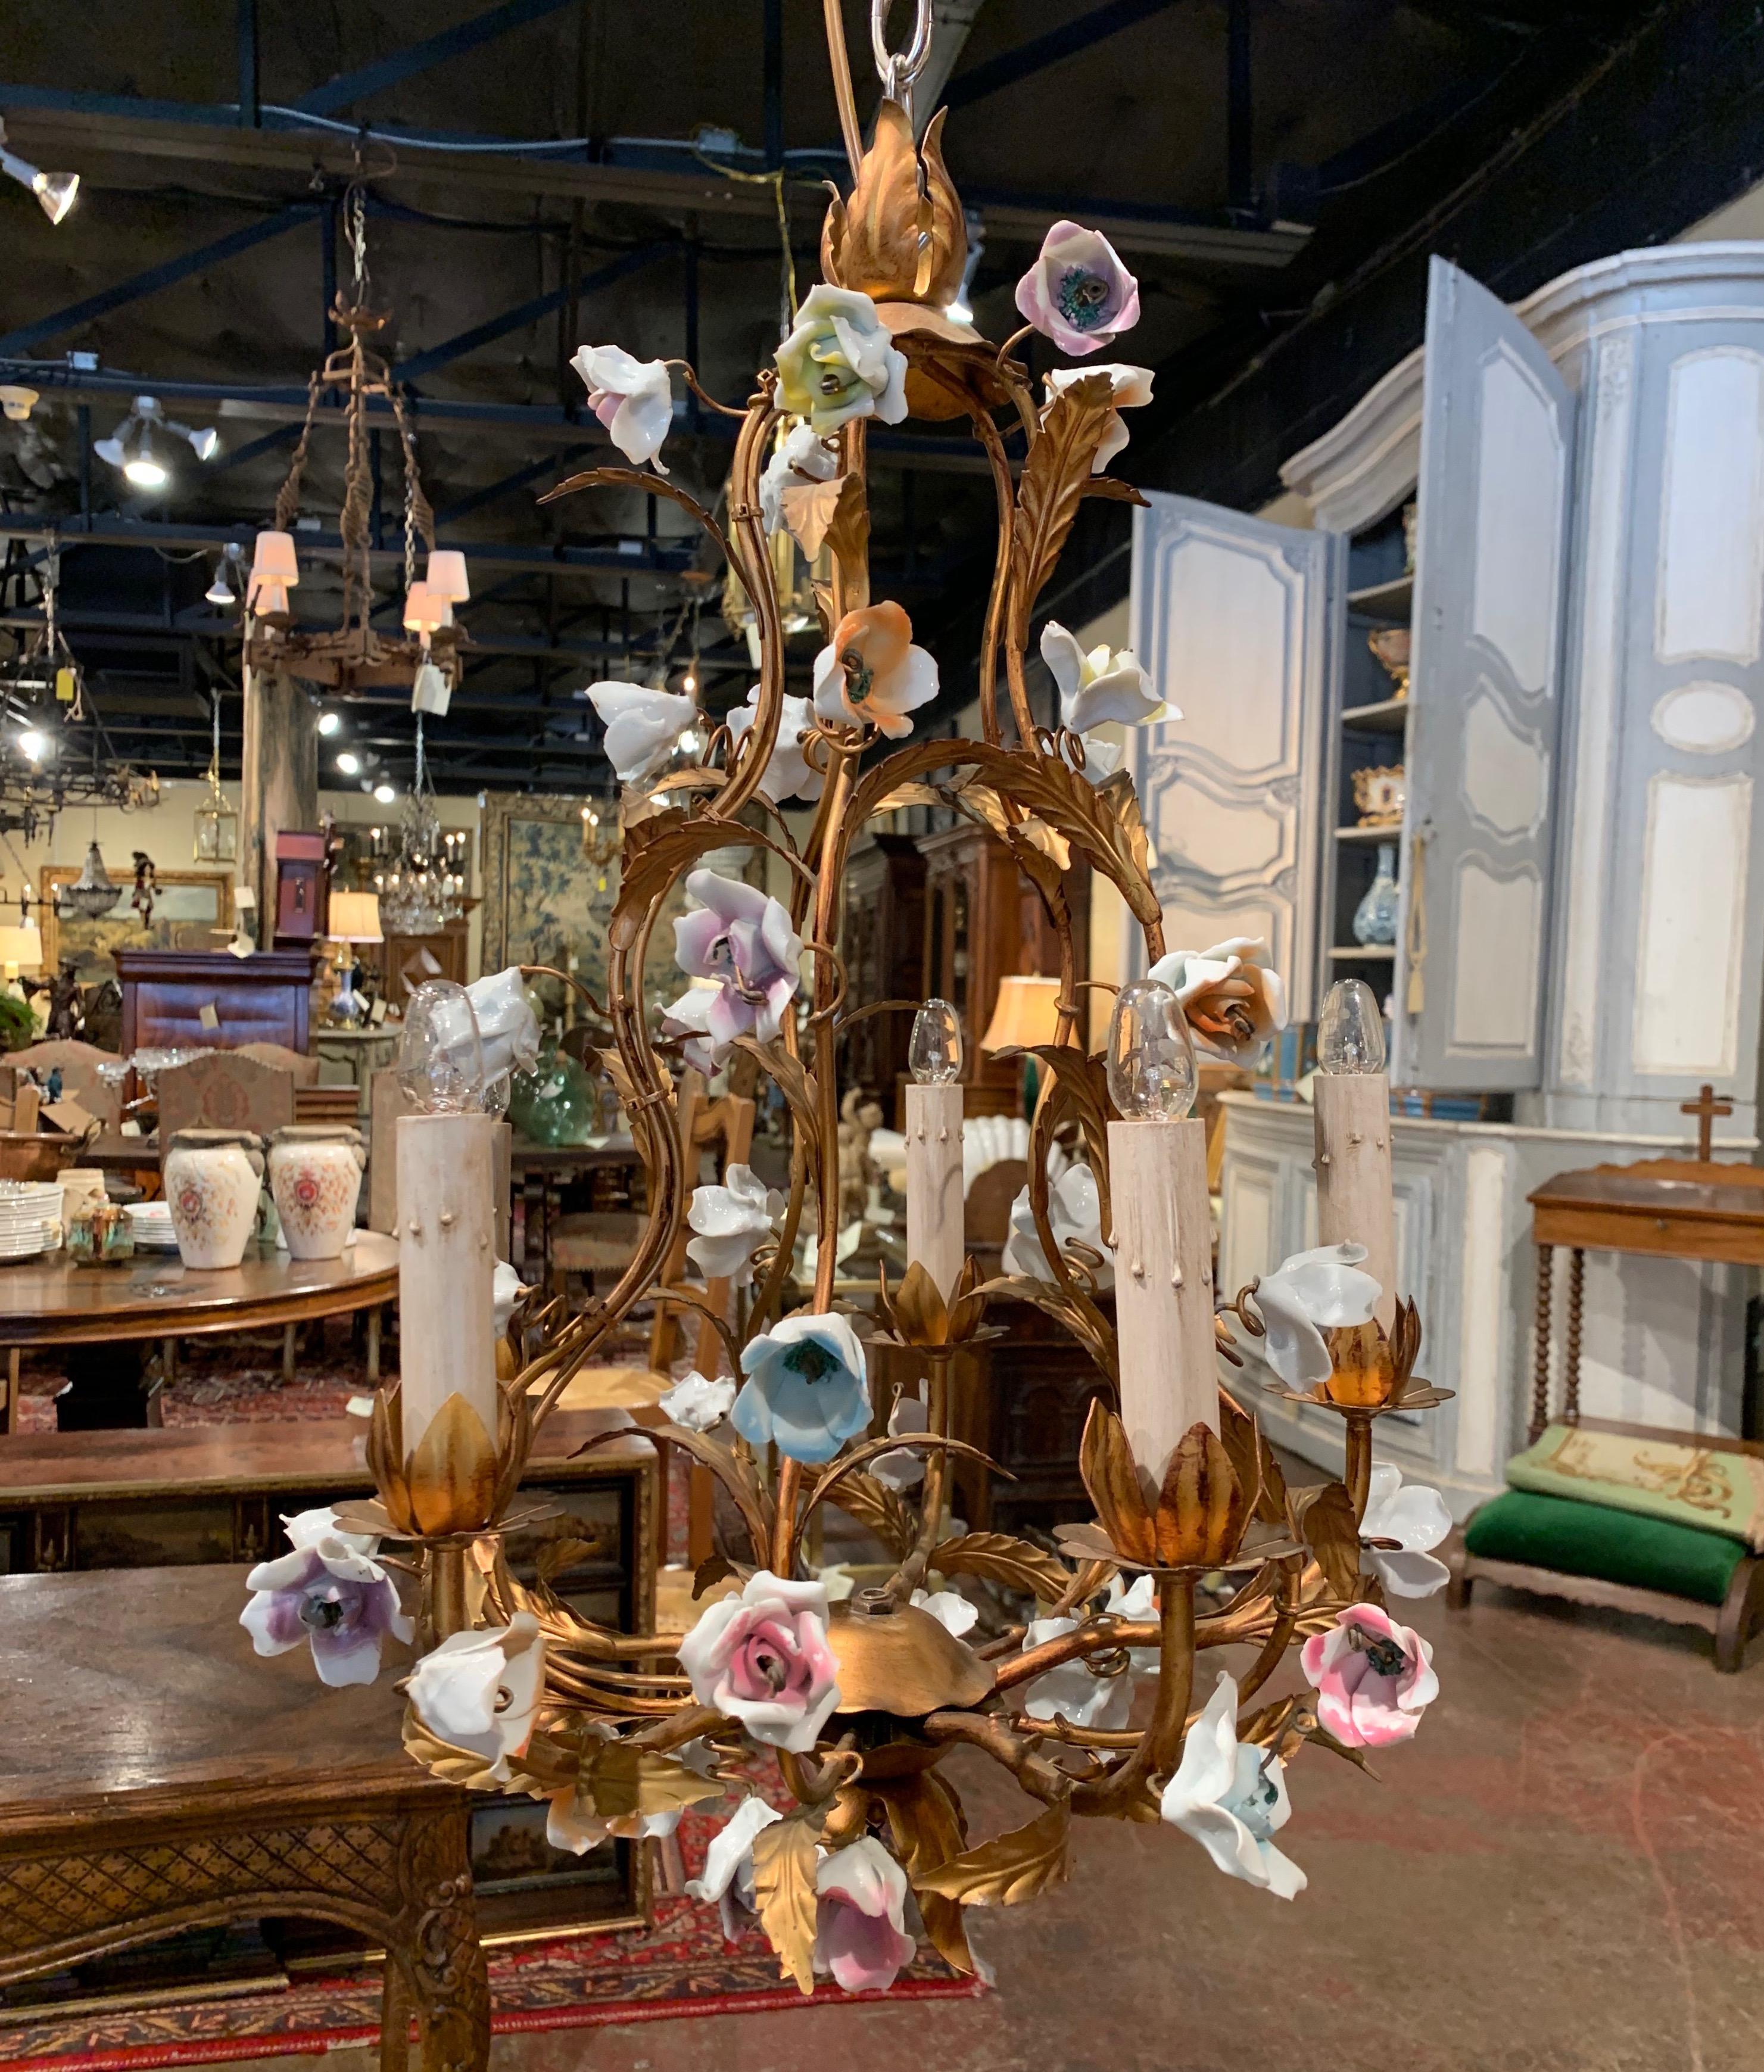 Decorate an entryway or powder room with this elegant and feminine light fixture. Crafted in France circa 1920, the petite, antique chandelier is decorated with colorful porcelain flowers and gilt painted leaves. The five-light chandelier has new